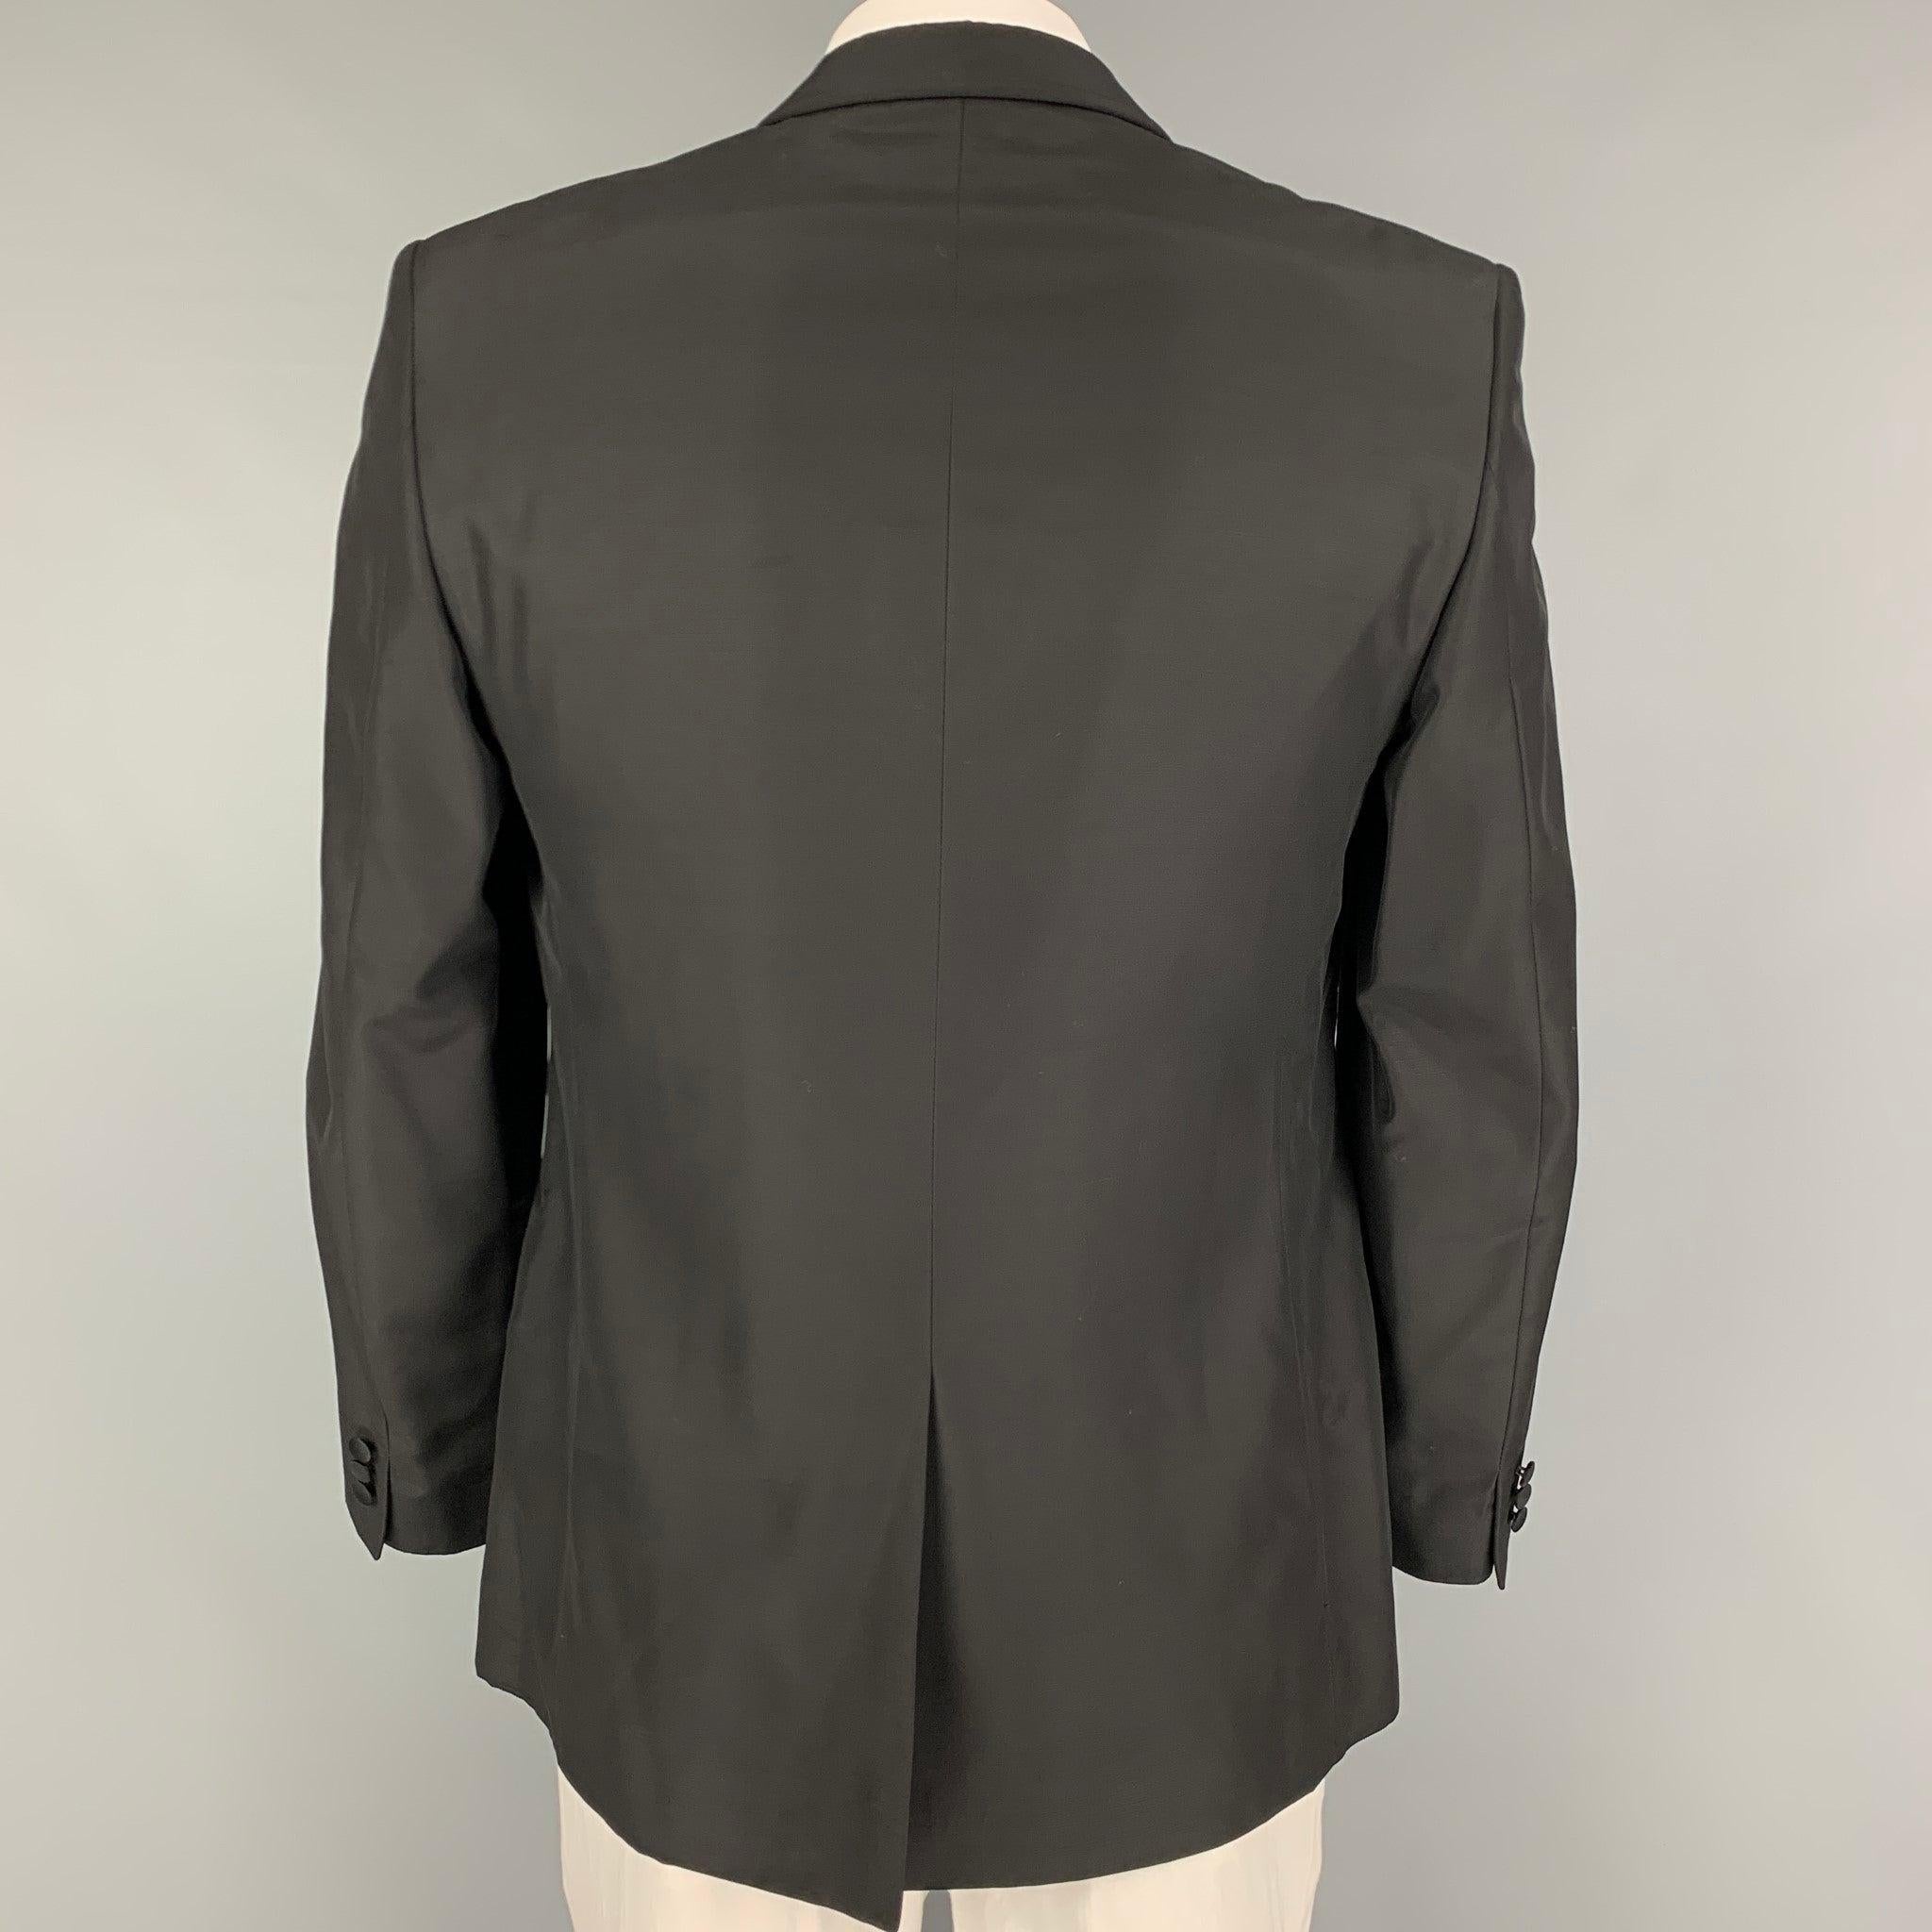 VERSACE COLLECTION Size 42 Black Viscose Wool Tuxedo Sport Coat In Good Condition For Sale In San Francisco, CA